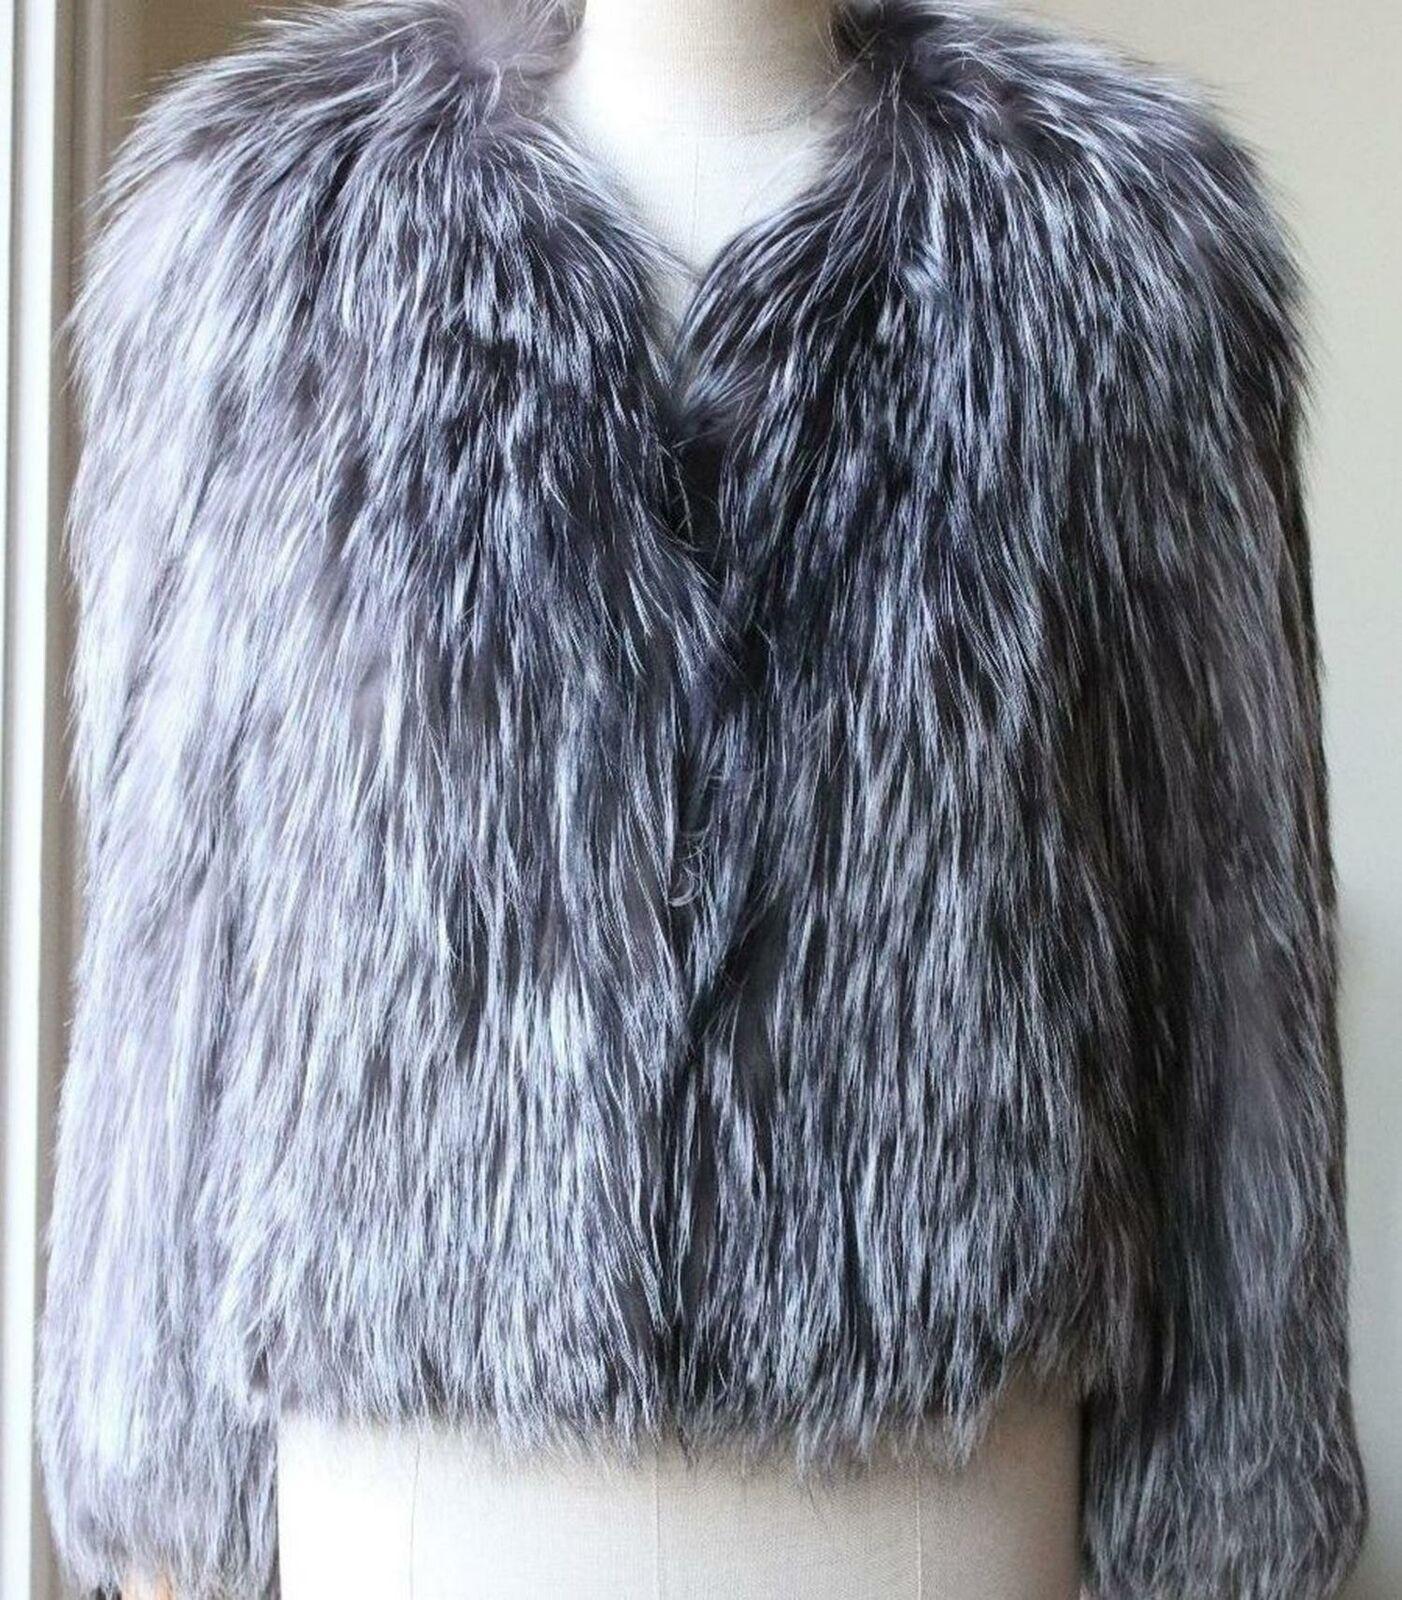 This 'Aileen' jacket by Isabel Marant is crafted from grey fox-fur in a boxy cut is perfect for those wintery months.
Grey fox fur.
Hook fastening at front.
100% Fox; lining: 100% cotton.
Size: FR 38 (UK 10, US 6, IT 42)
Bust measures approx. 36.7